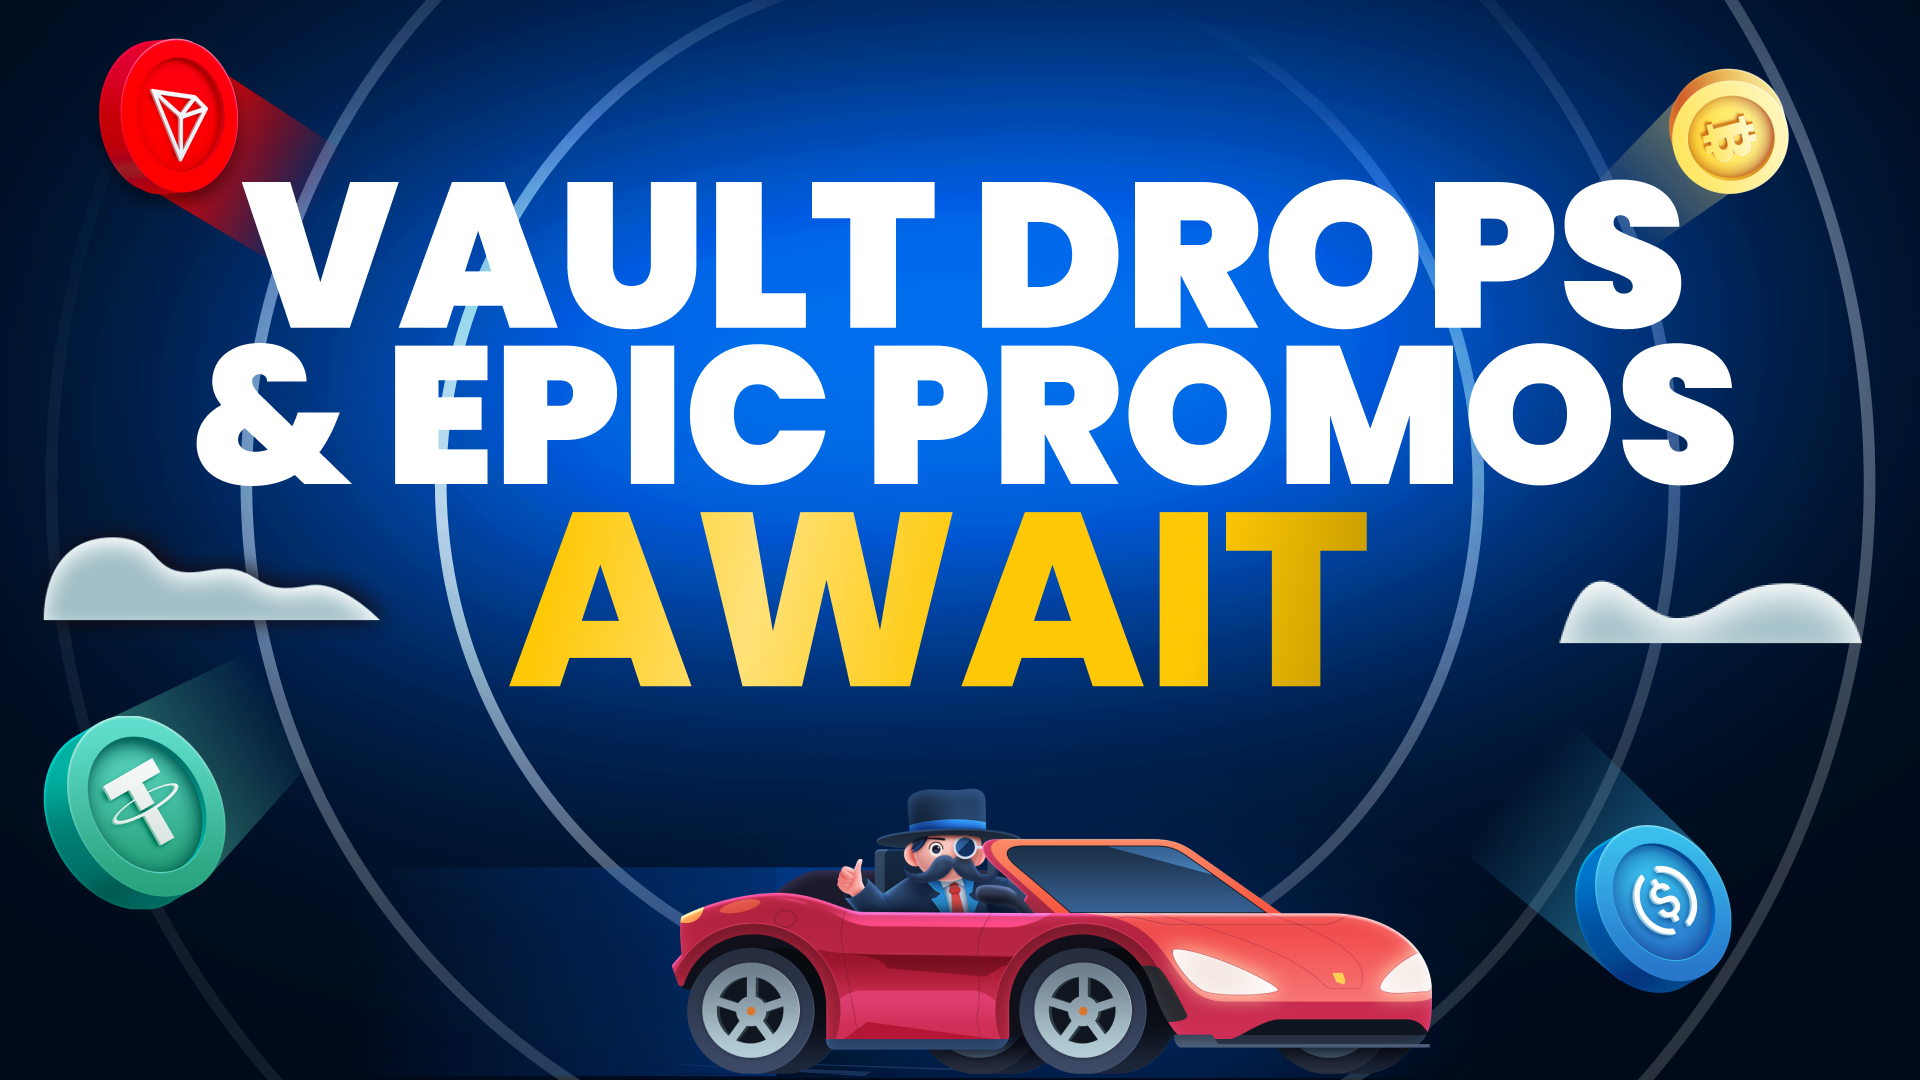 A red sports car with Mr. Chips in a top hat, text 'VAULT DROPS & EPIC PROMOS AWAIT.